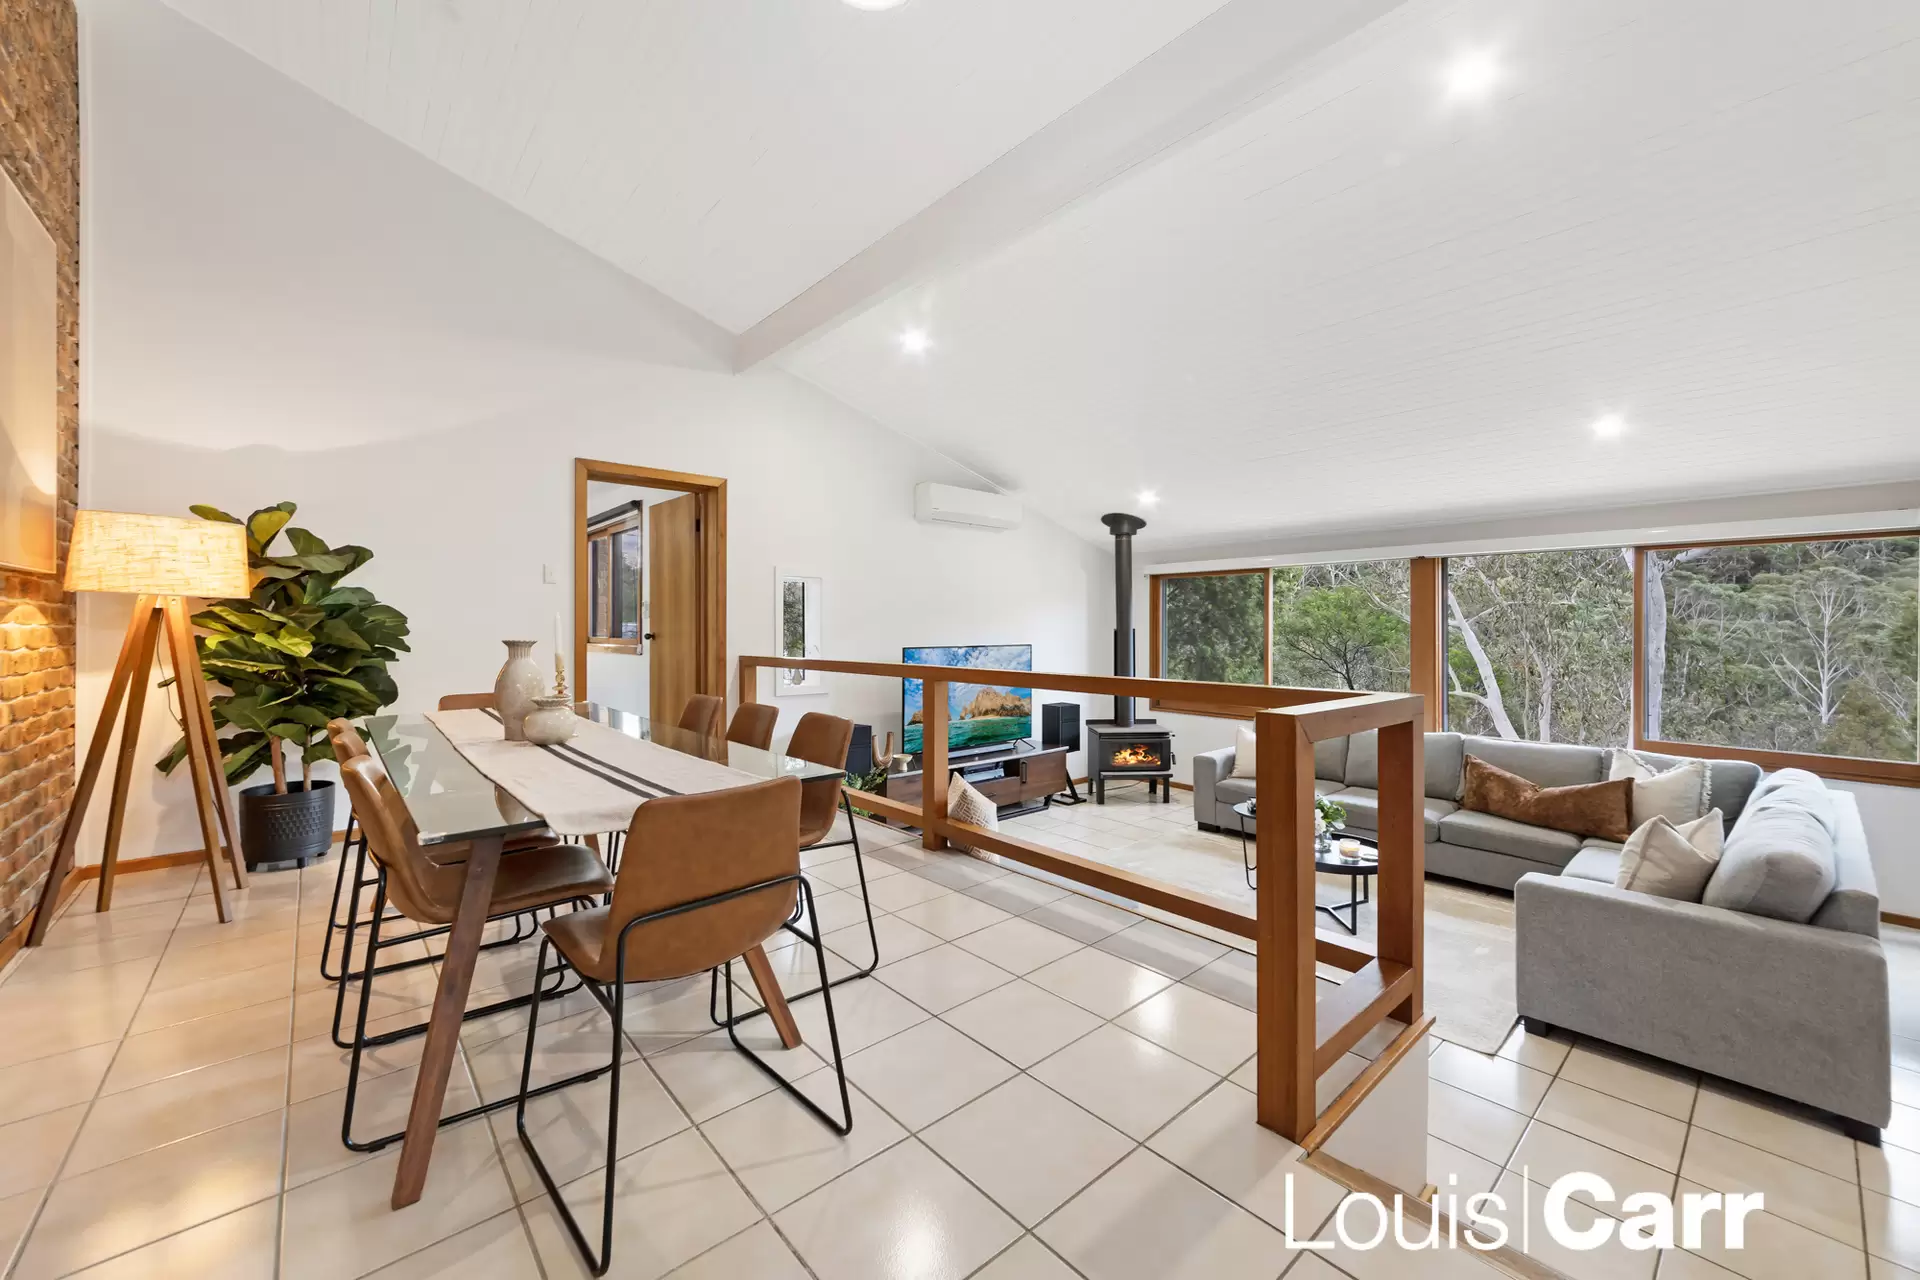 Photo #3: 11 Araluen Place, Glenhaven - Sold by Louis Carr Real Estate